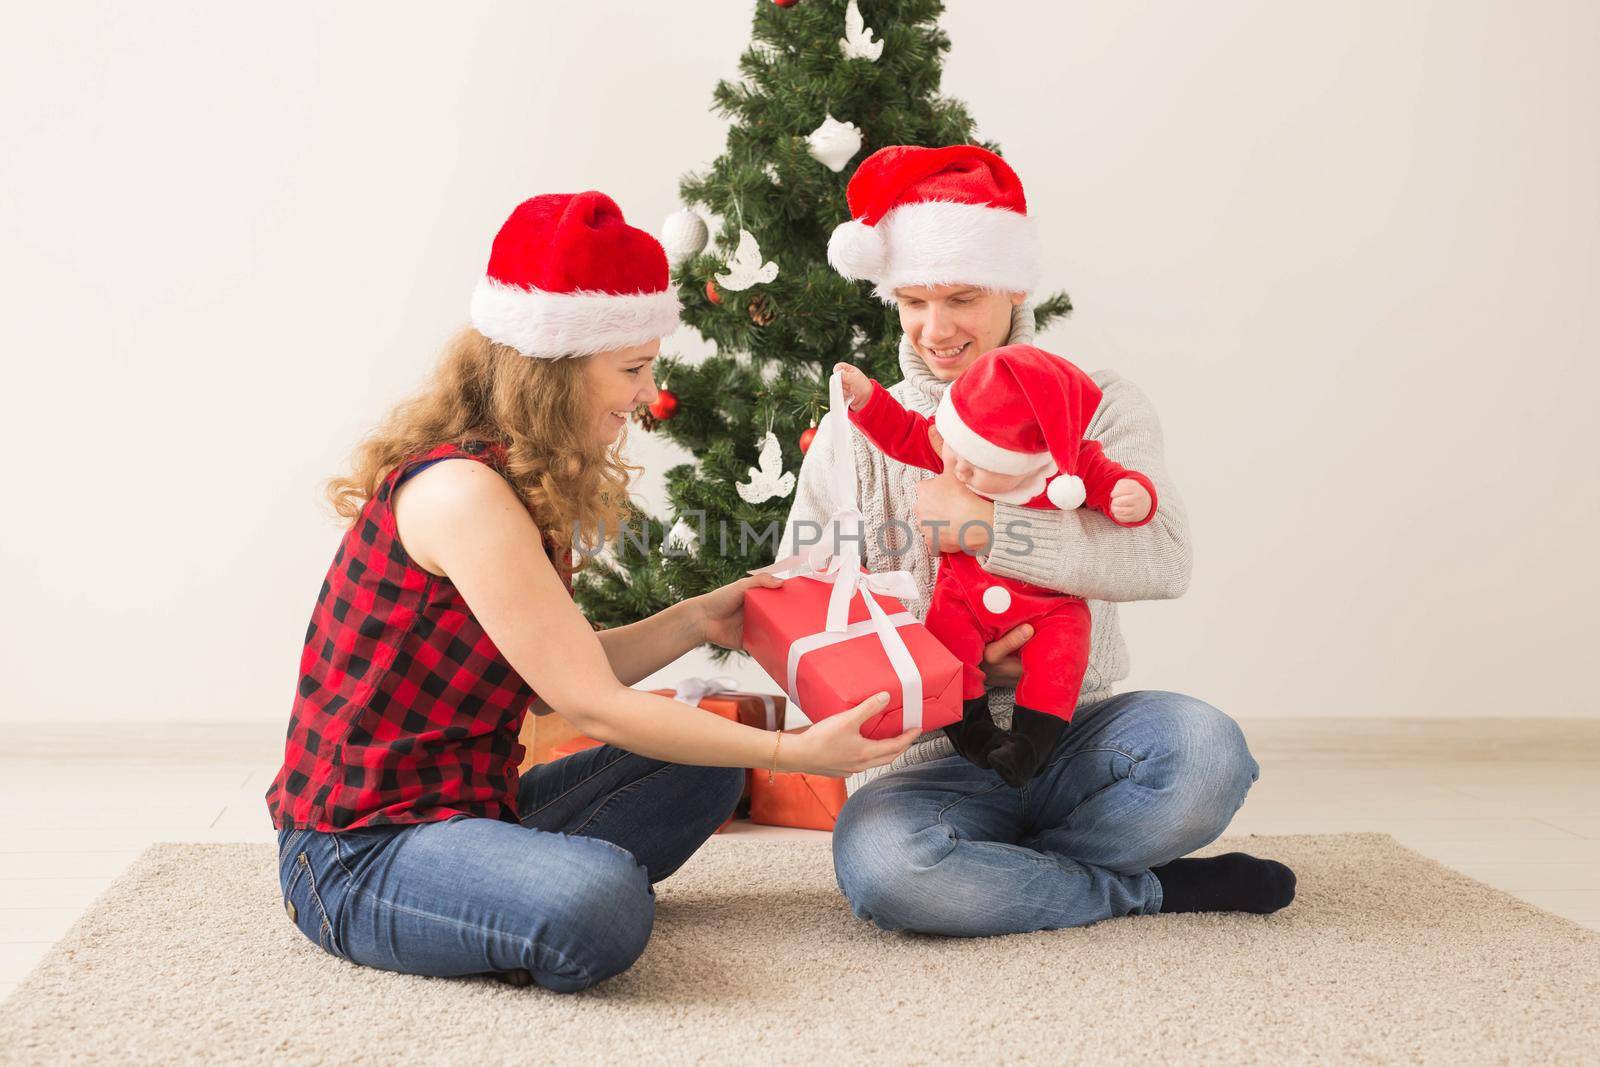 Happy couple with baby celebrating Christmas together at home